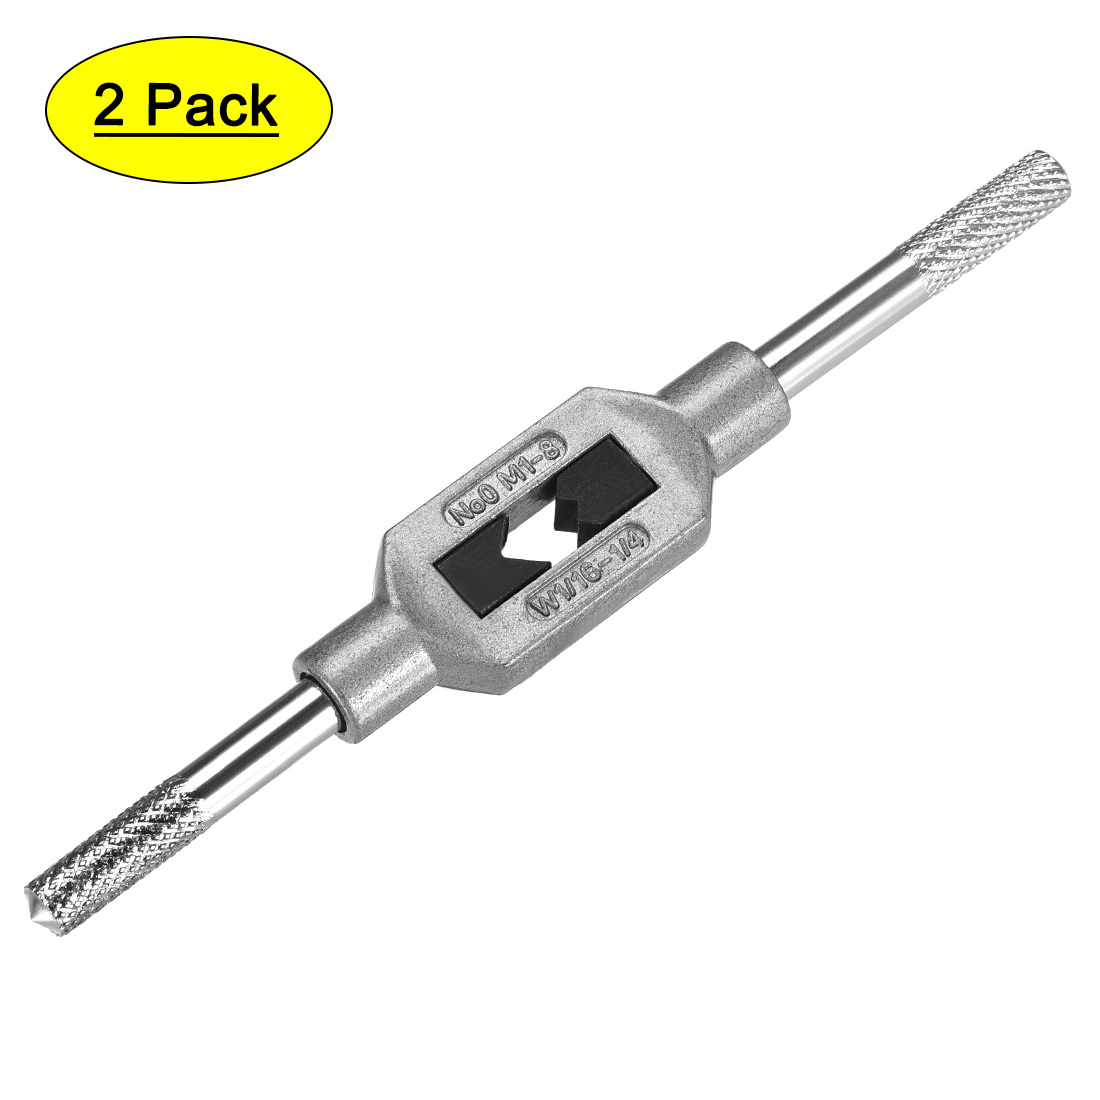 Uxcell Metric M1-M8 1/16" - 1/4" (UNC/UNF) Adjustable Tap Wrench Handle Nickel Plated 2 Pack - image 1 of 6